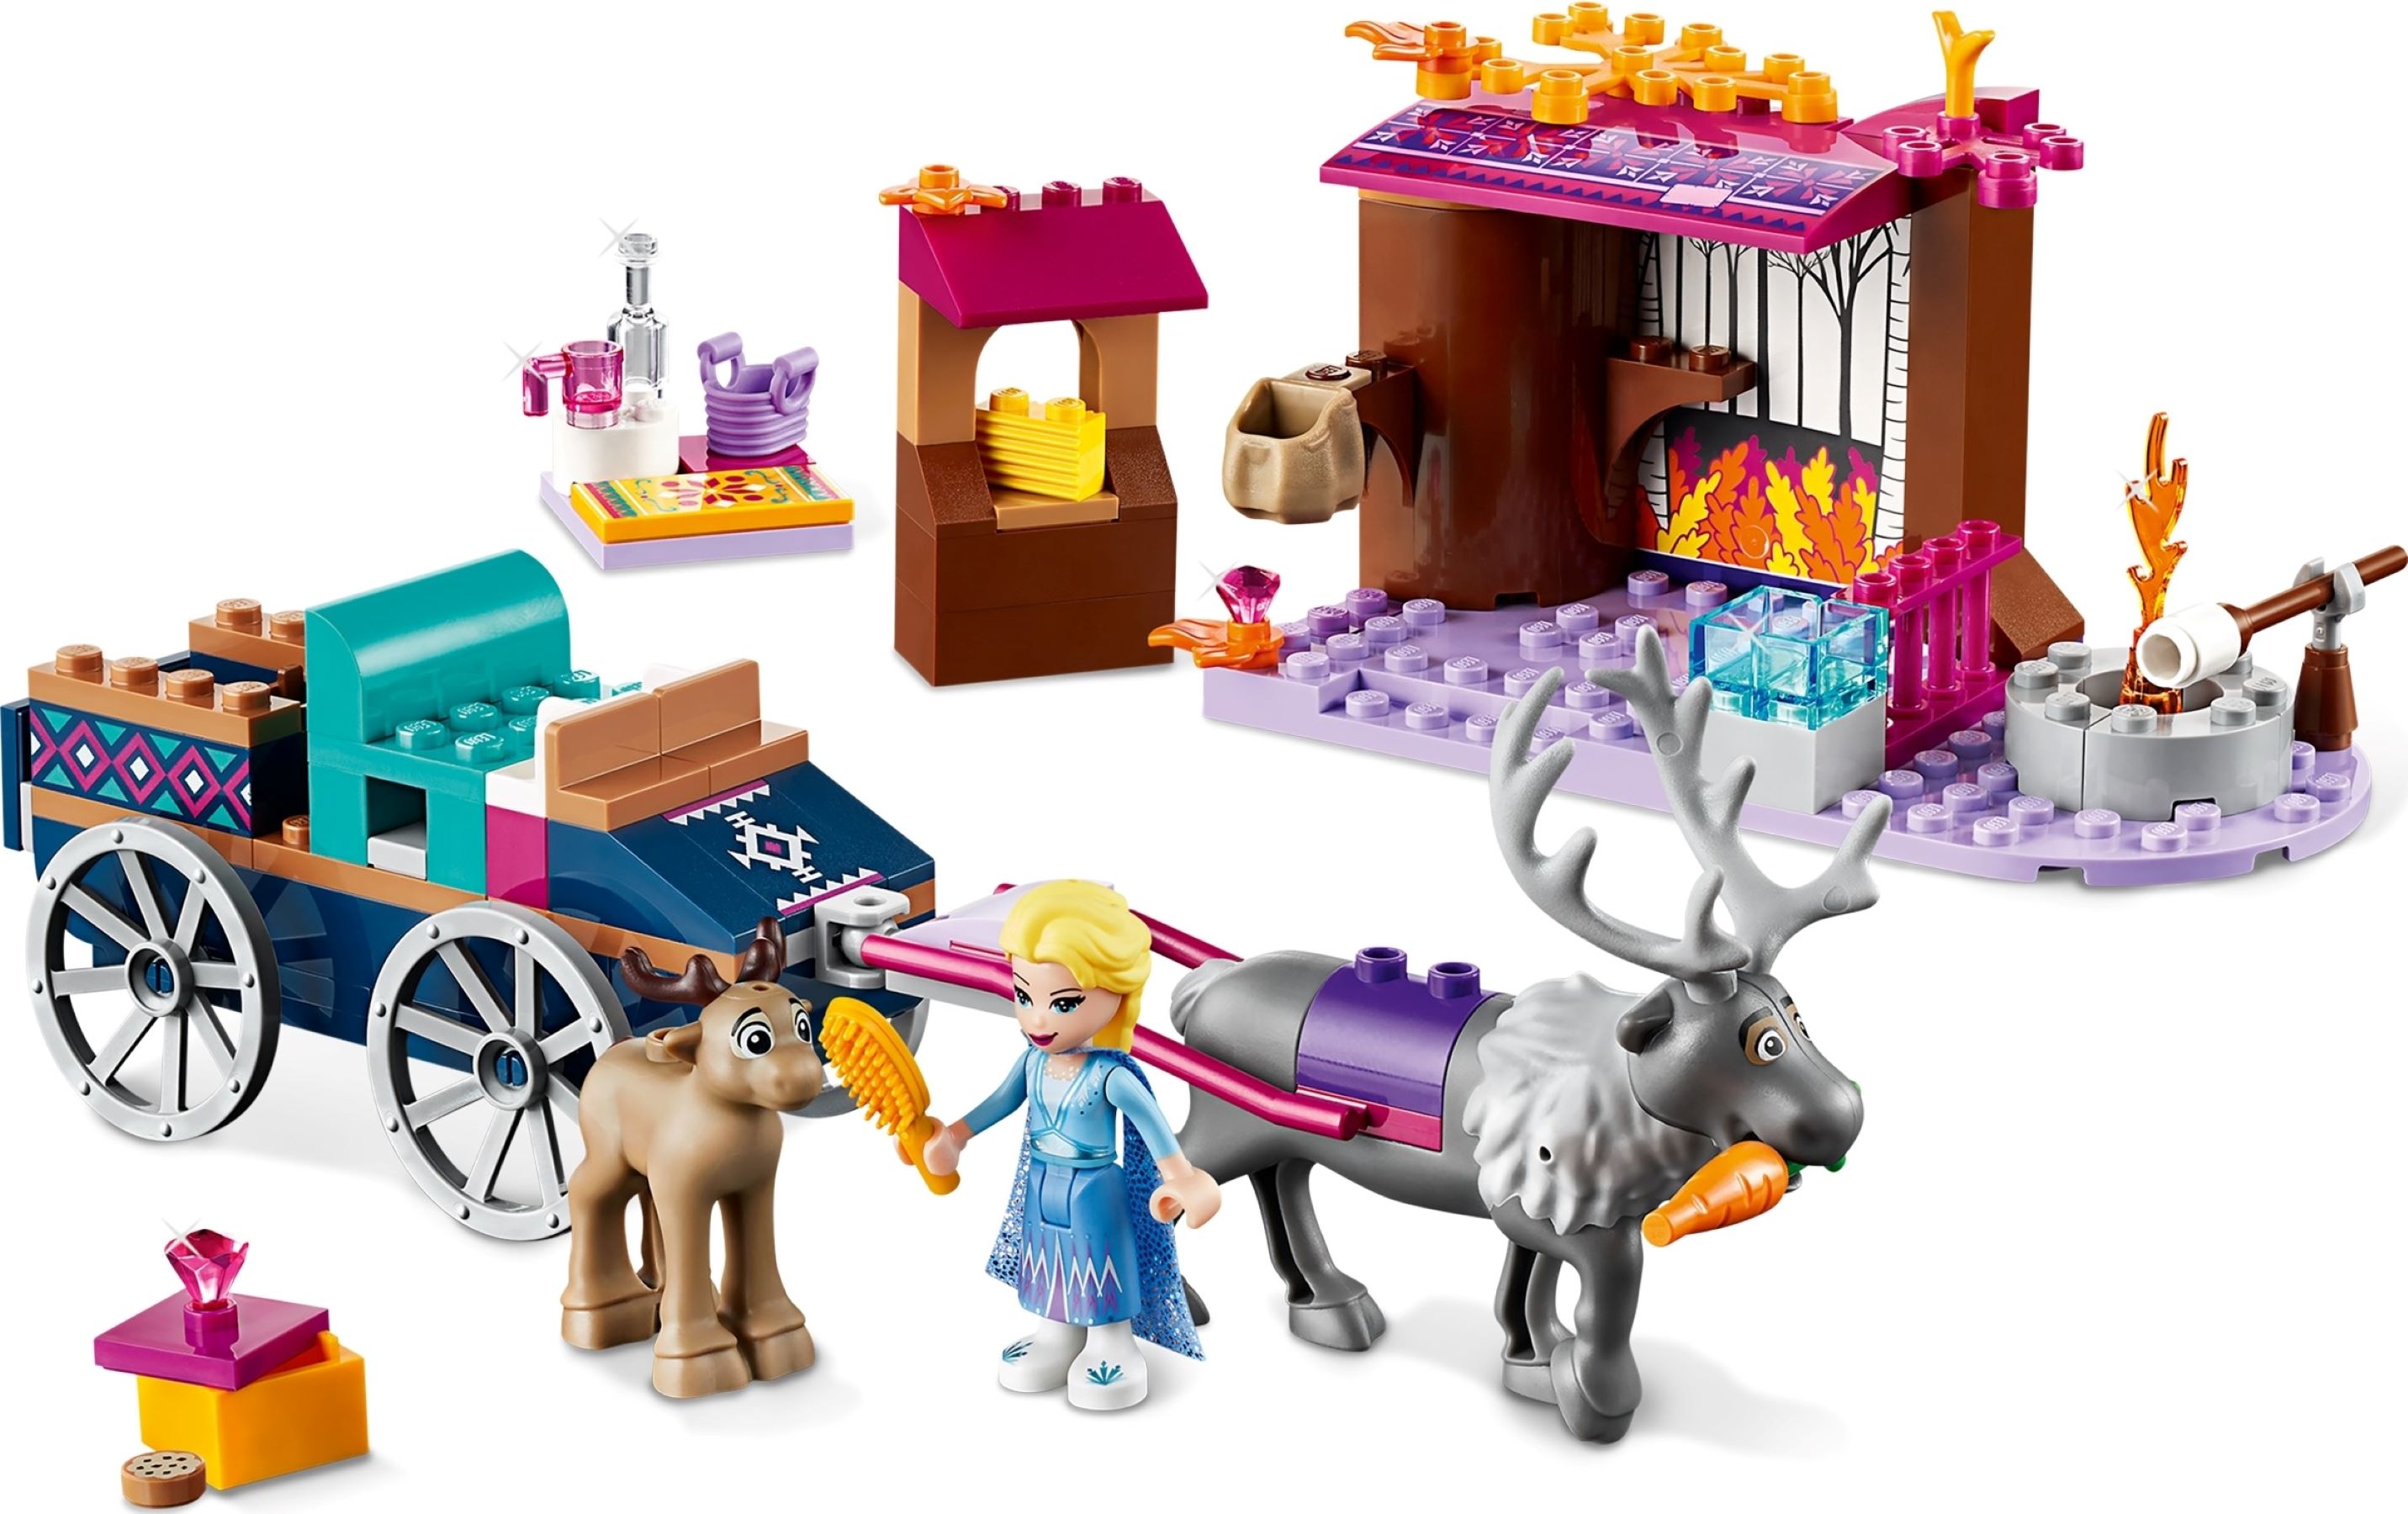 Disney Frozen Construction Toys and 